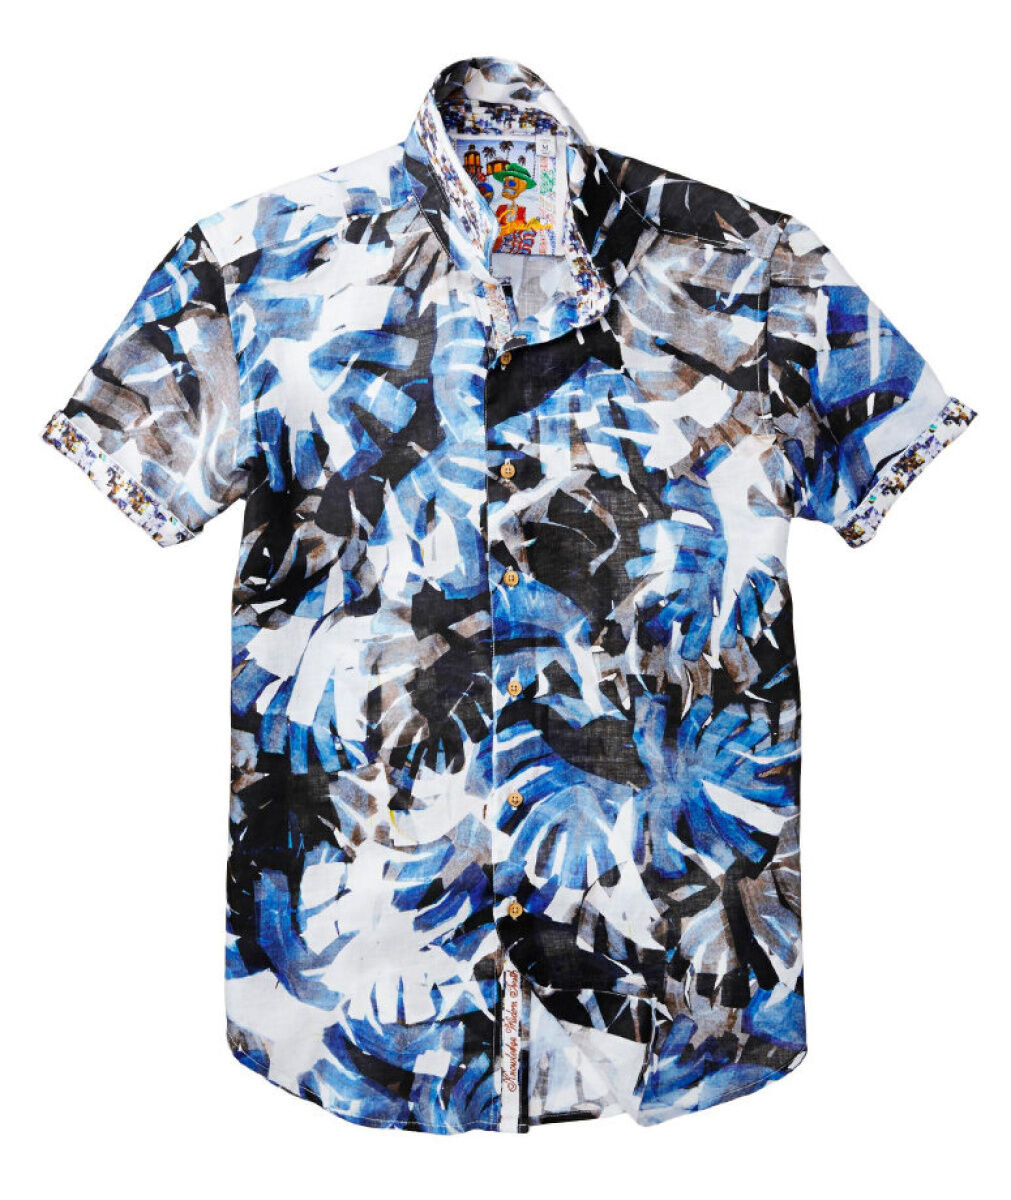 Toronto Maple Leafs Floral Button-Up Shirt - Blue